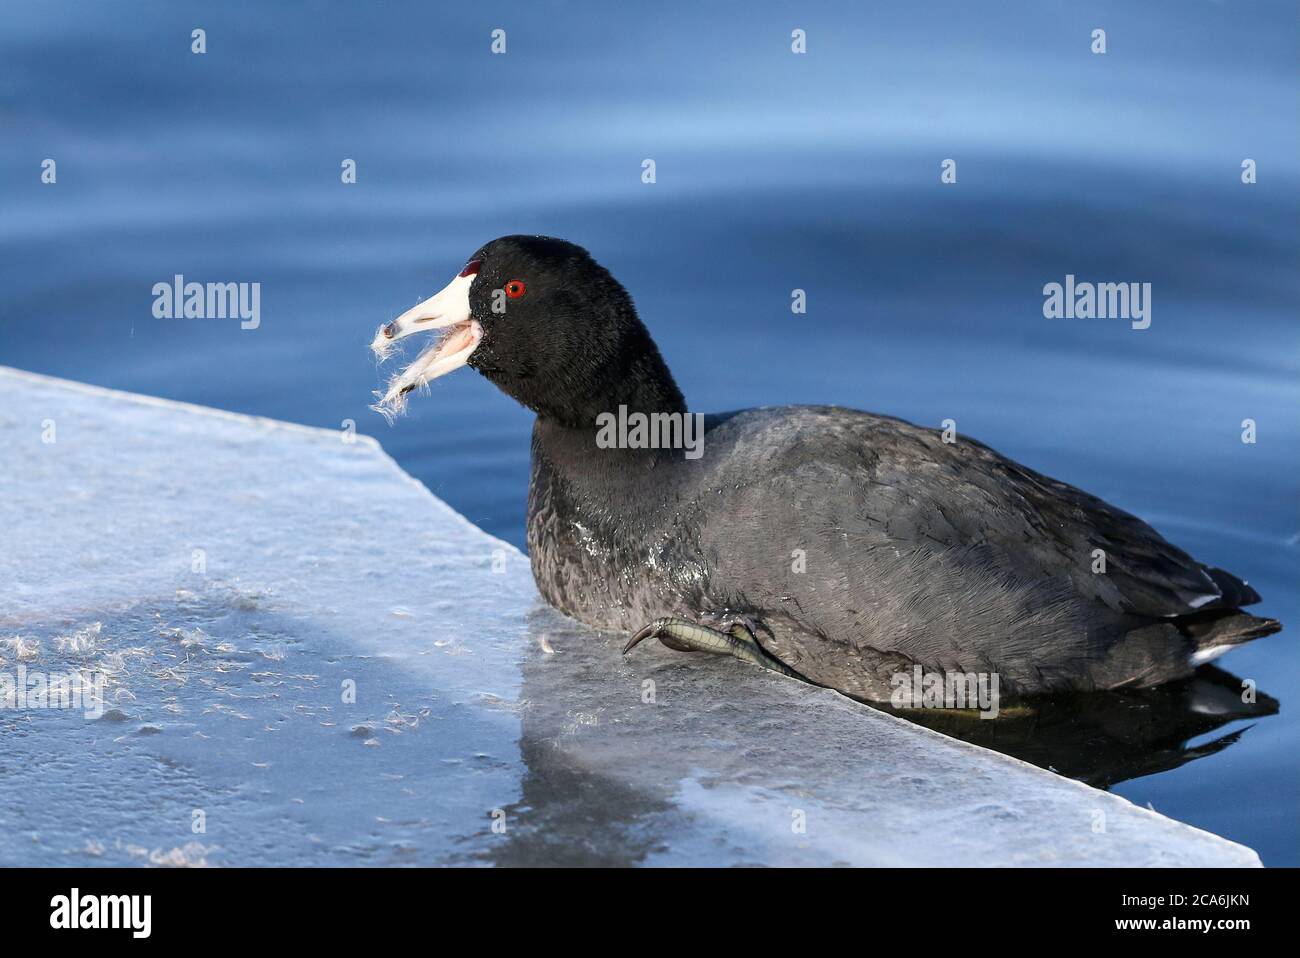 An American Coot eating its thistle snack while hanging on the edge of an icy lake. Stock Photo